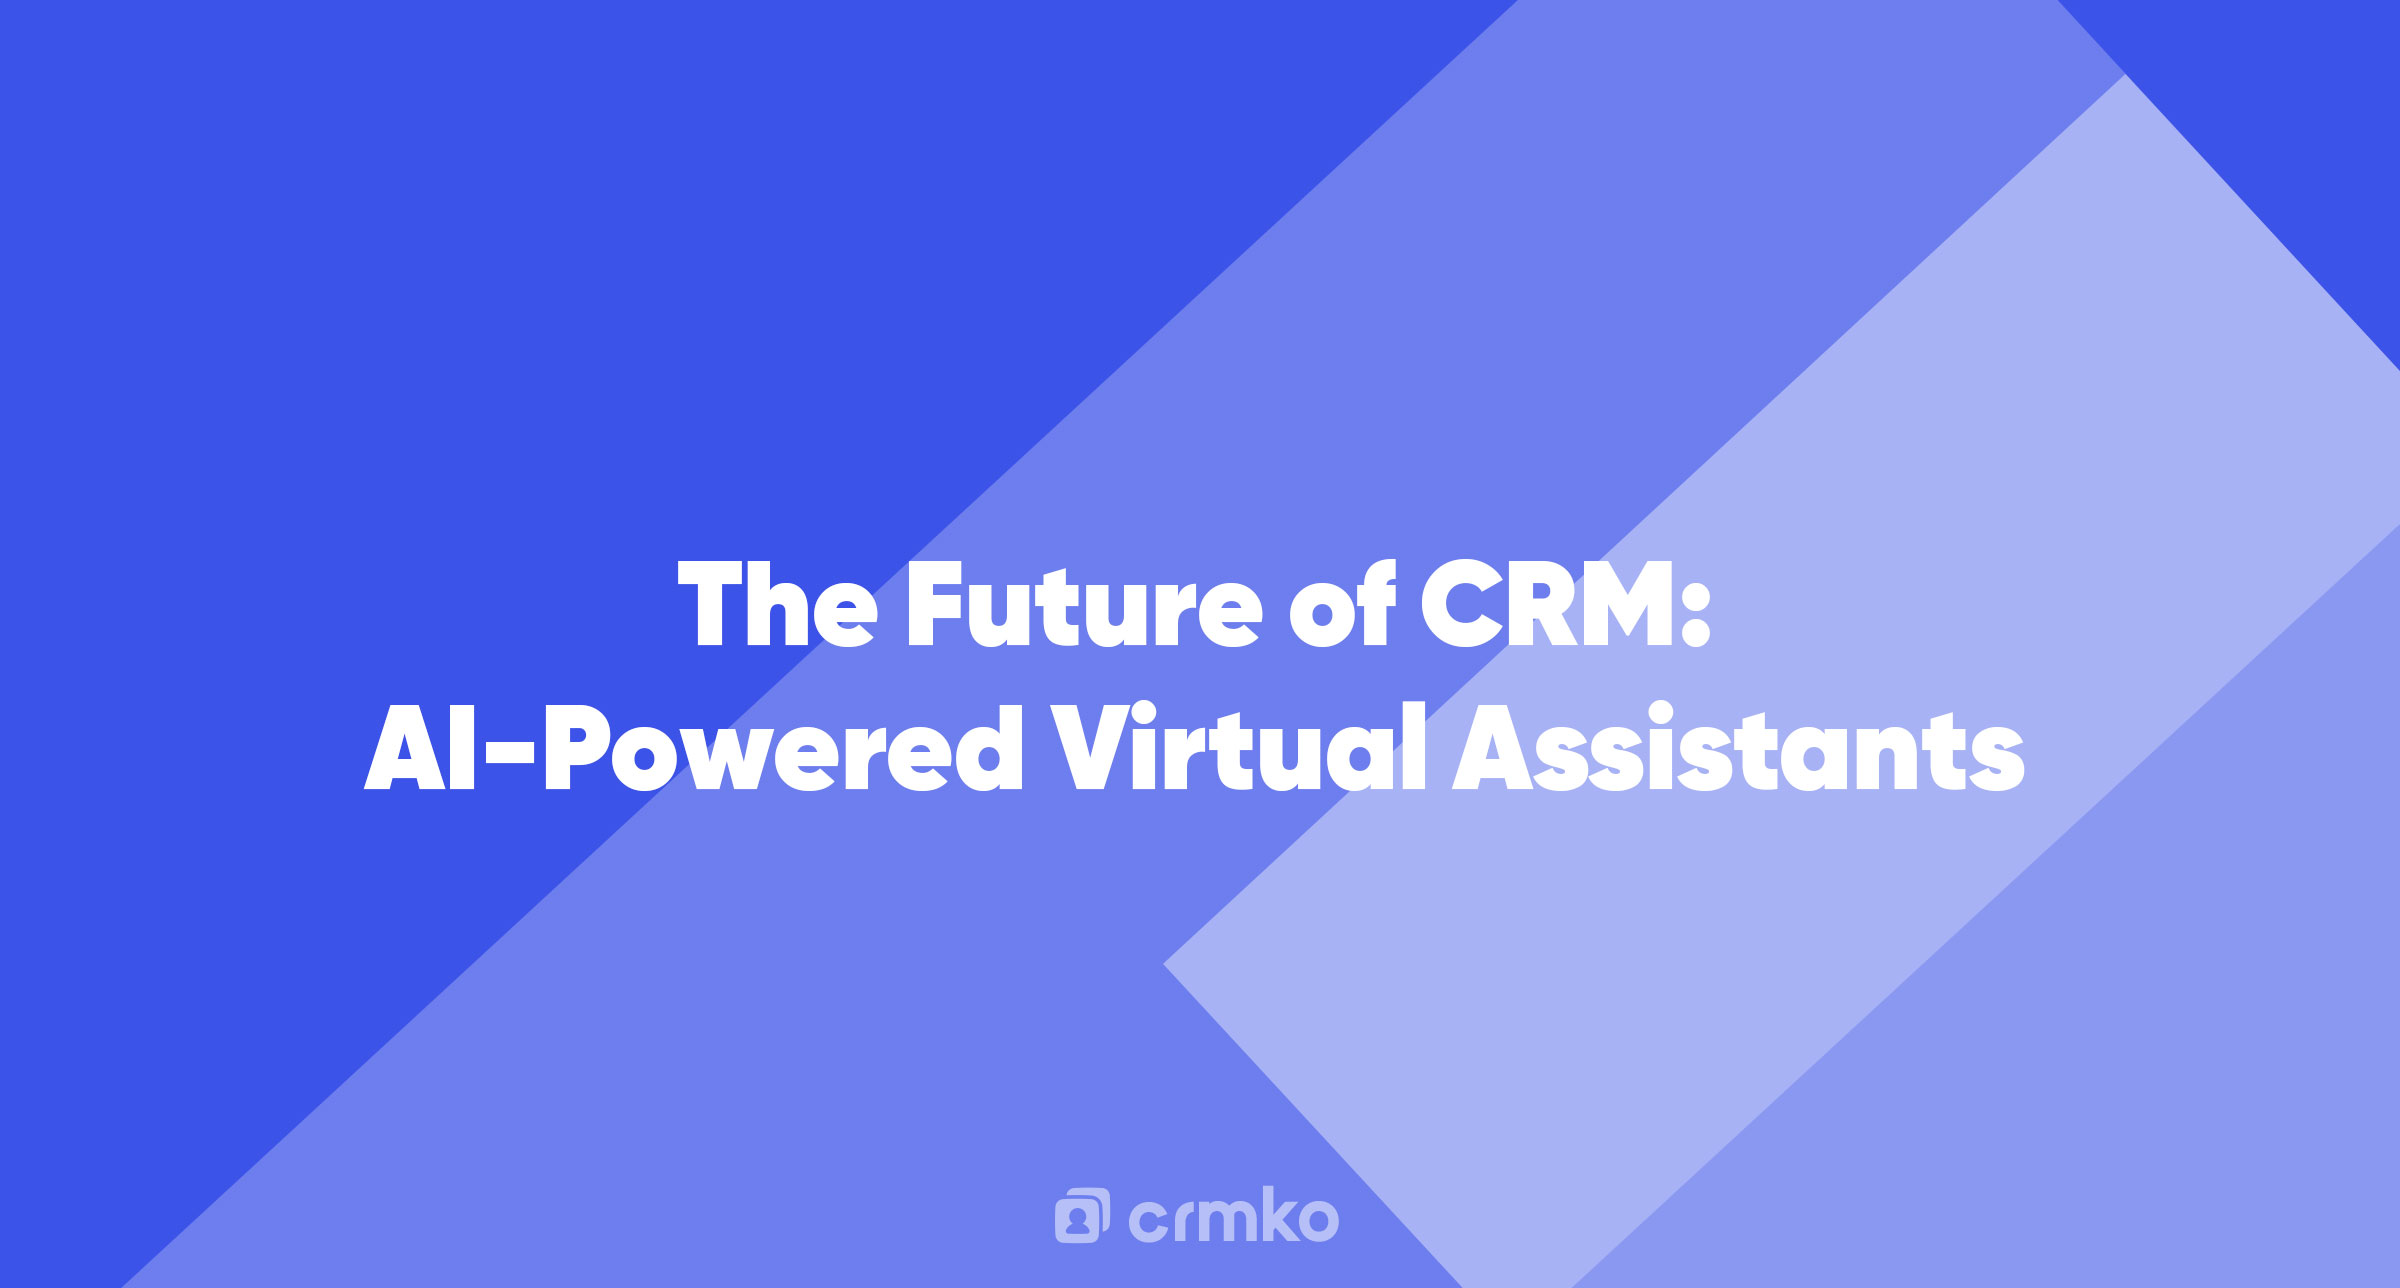 Article | The Future of CRM: AI-Powered Virtual Assistants